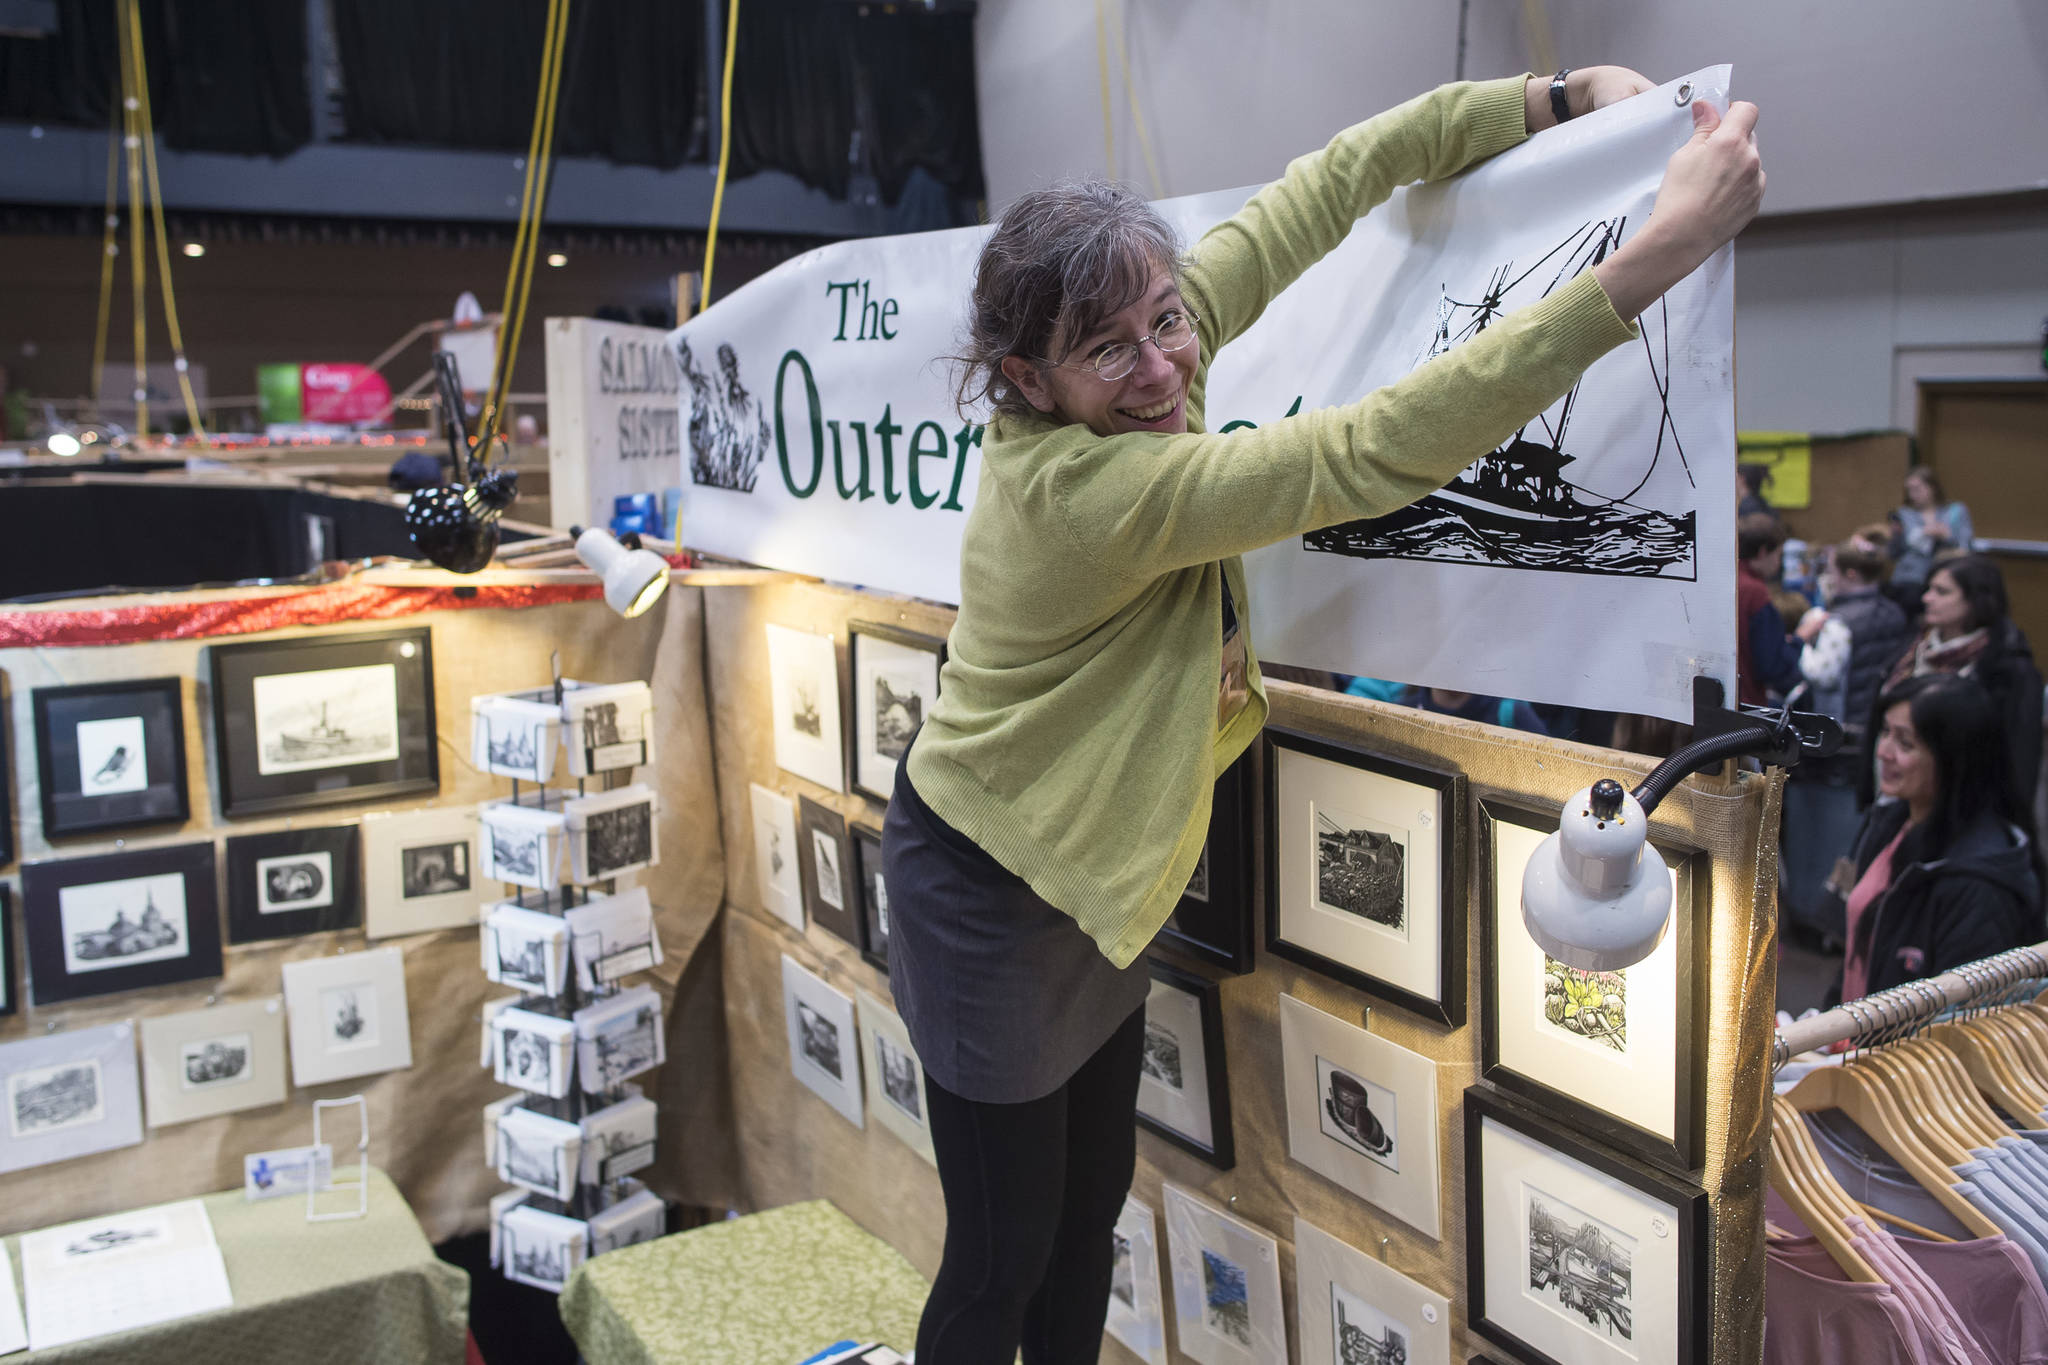 Rebecca Poulson ties up her sign “The Outer Coast” for her prints at the Public Market in Centennial Hall on Friday, Nov. 23, 2018. (Michael Penn | Juneau Empire)